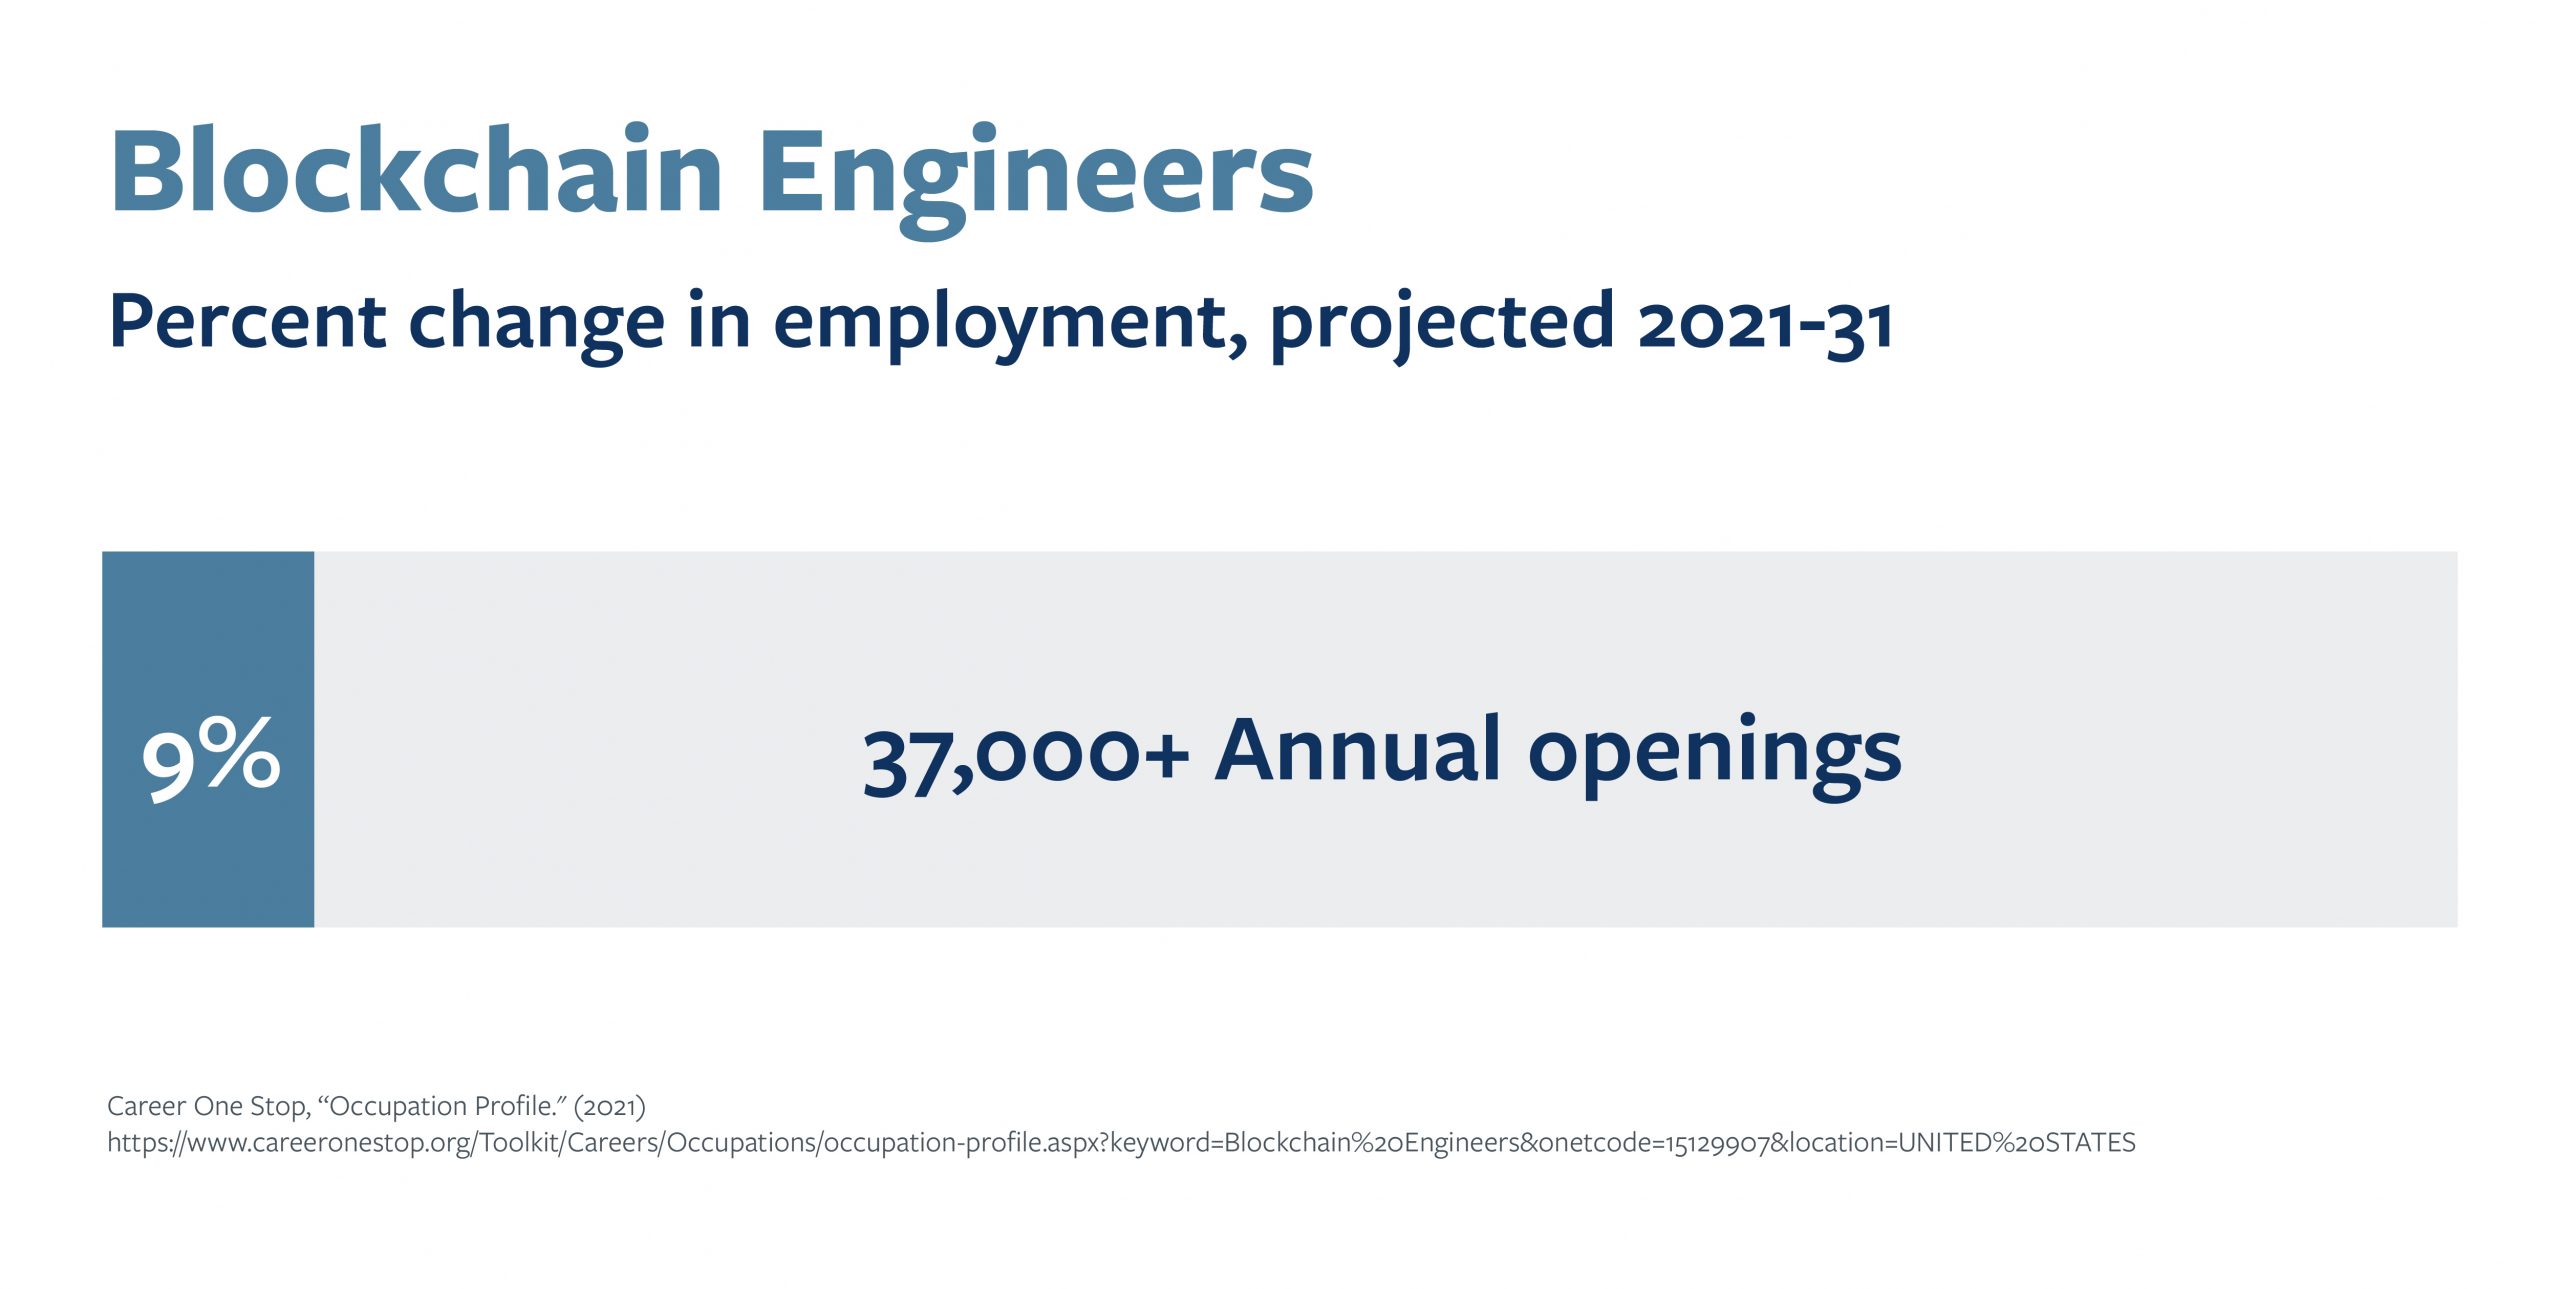 An image highlighting the projected job growth of blockchain engineers through 2031.